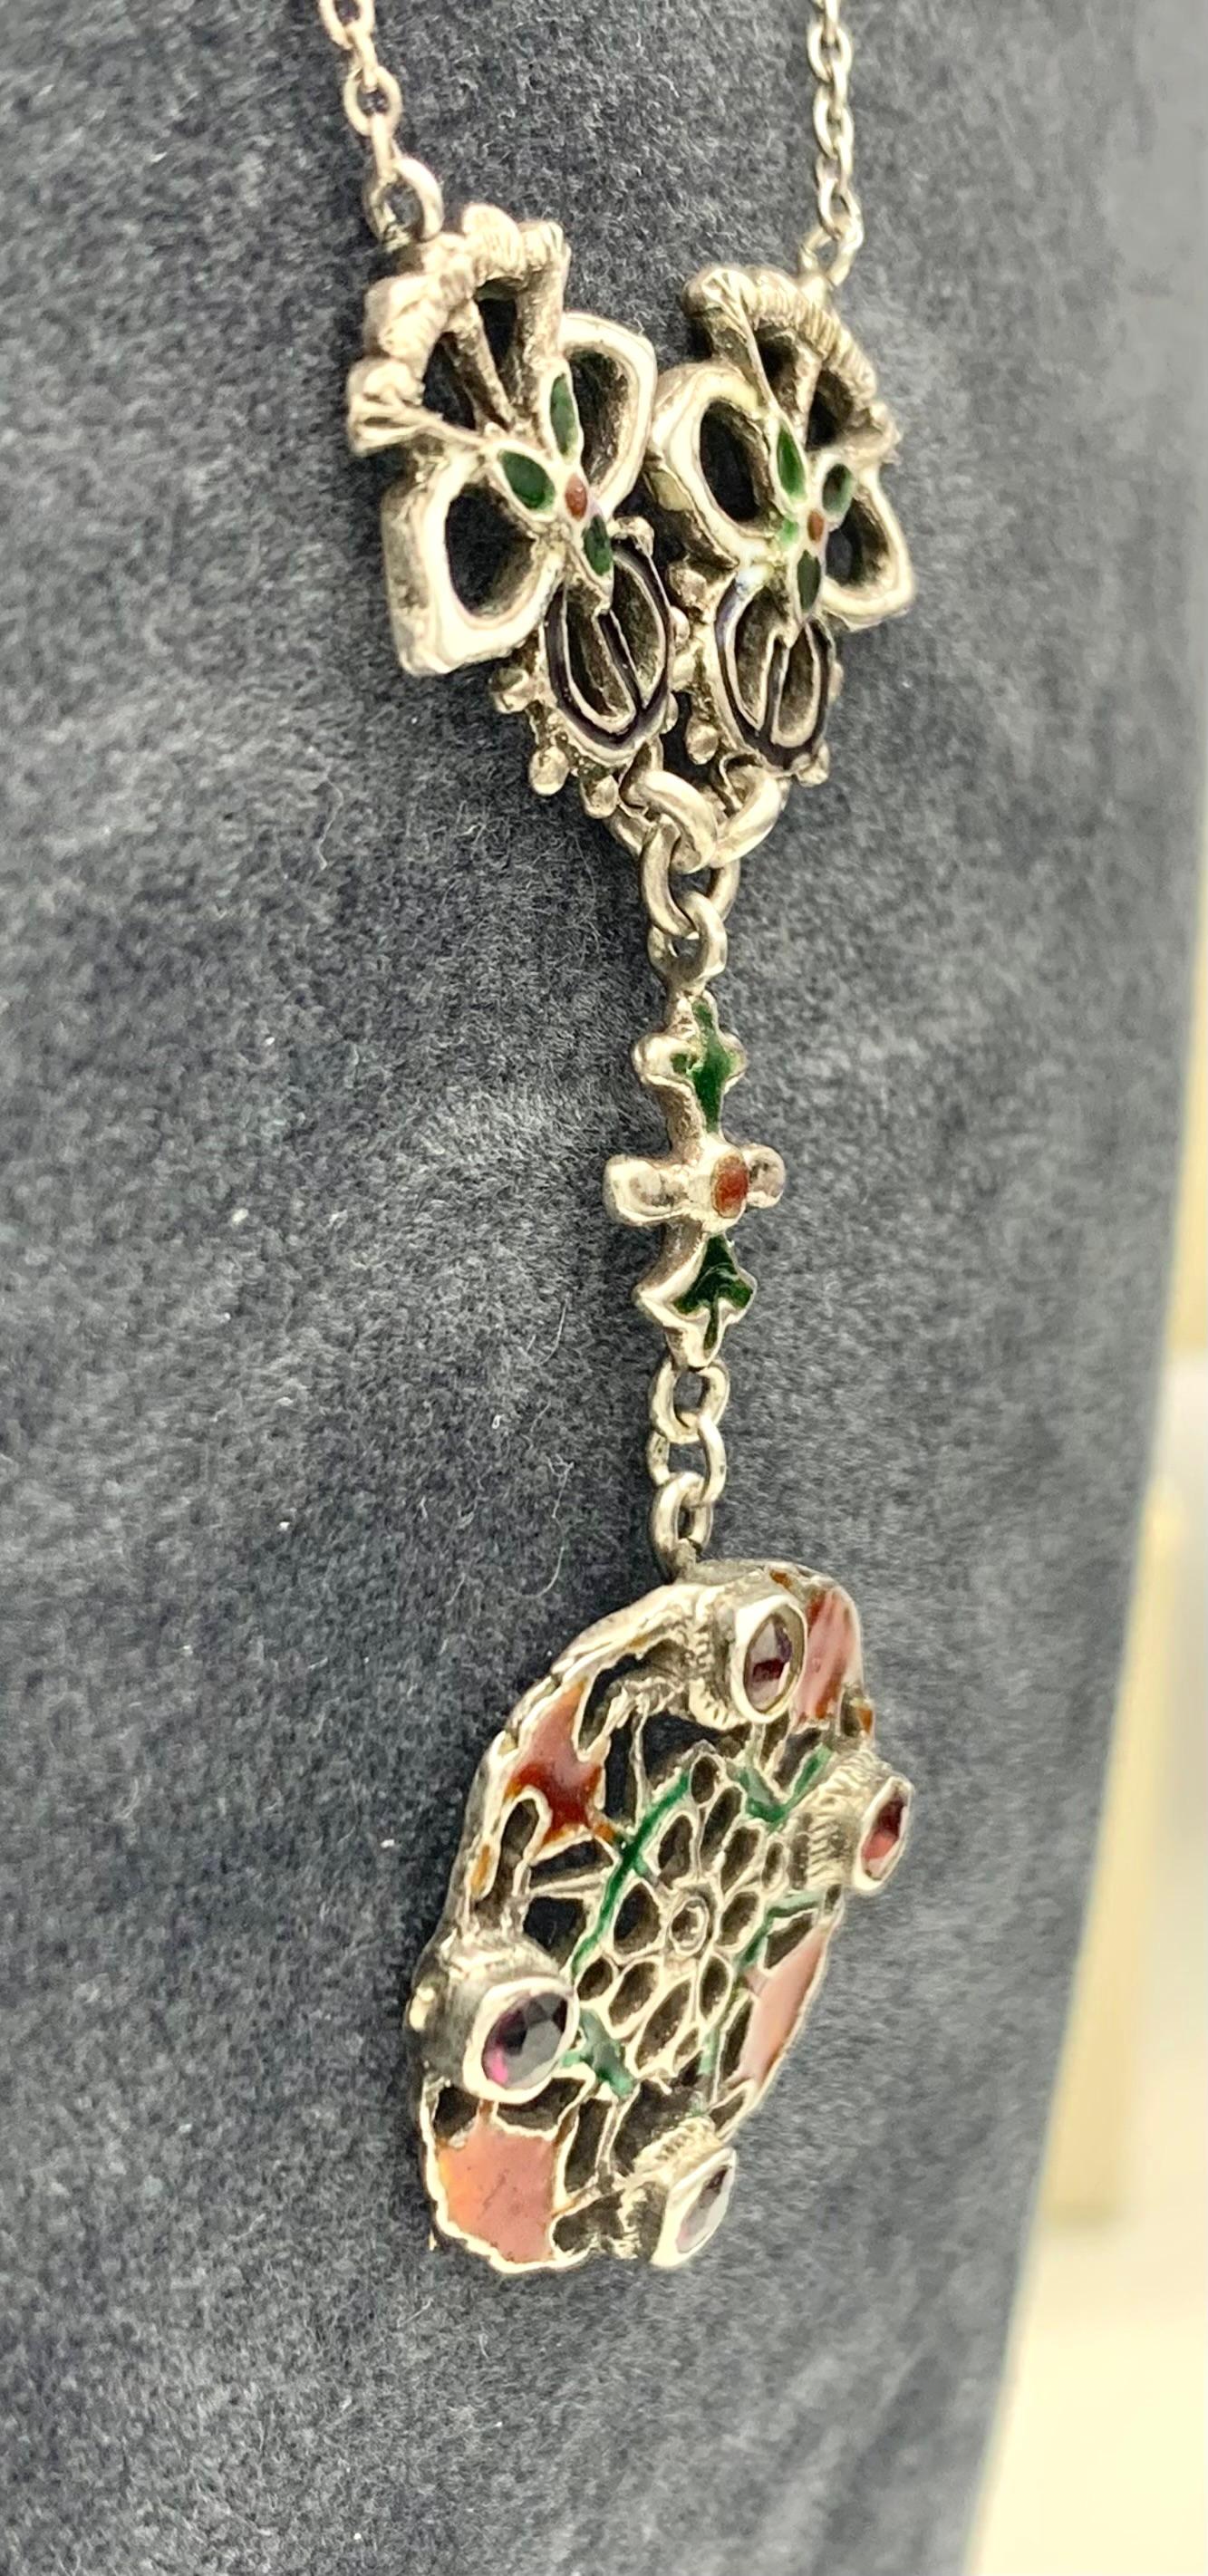 Aesthetic Movement Antique Arts And Crafts Silver Enamel Necklace Polychrome Enamel Garnets  For Sale